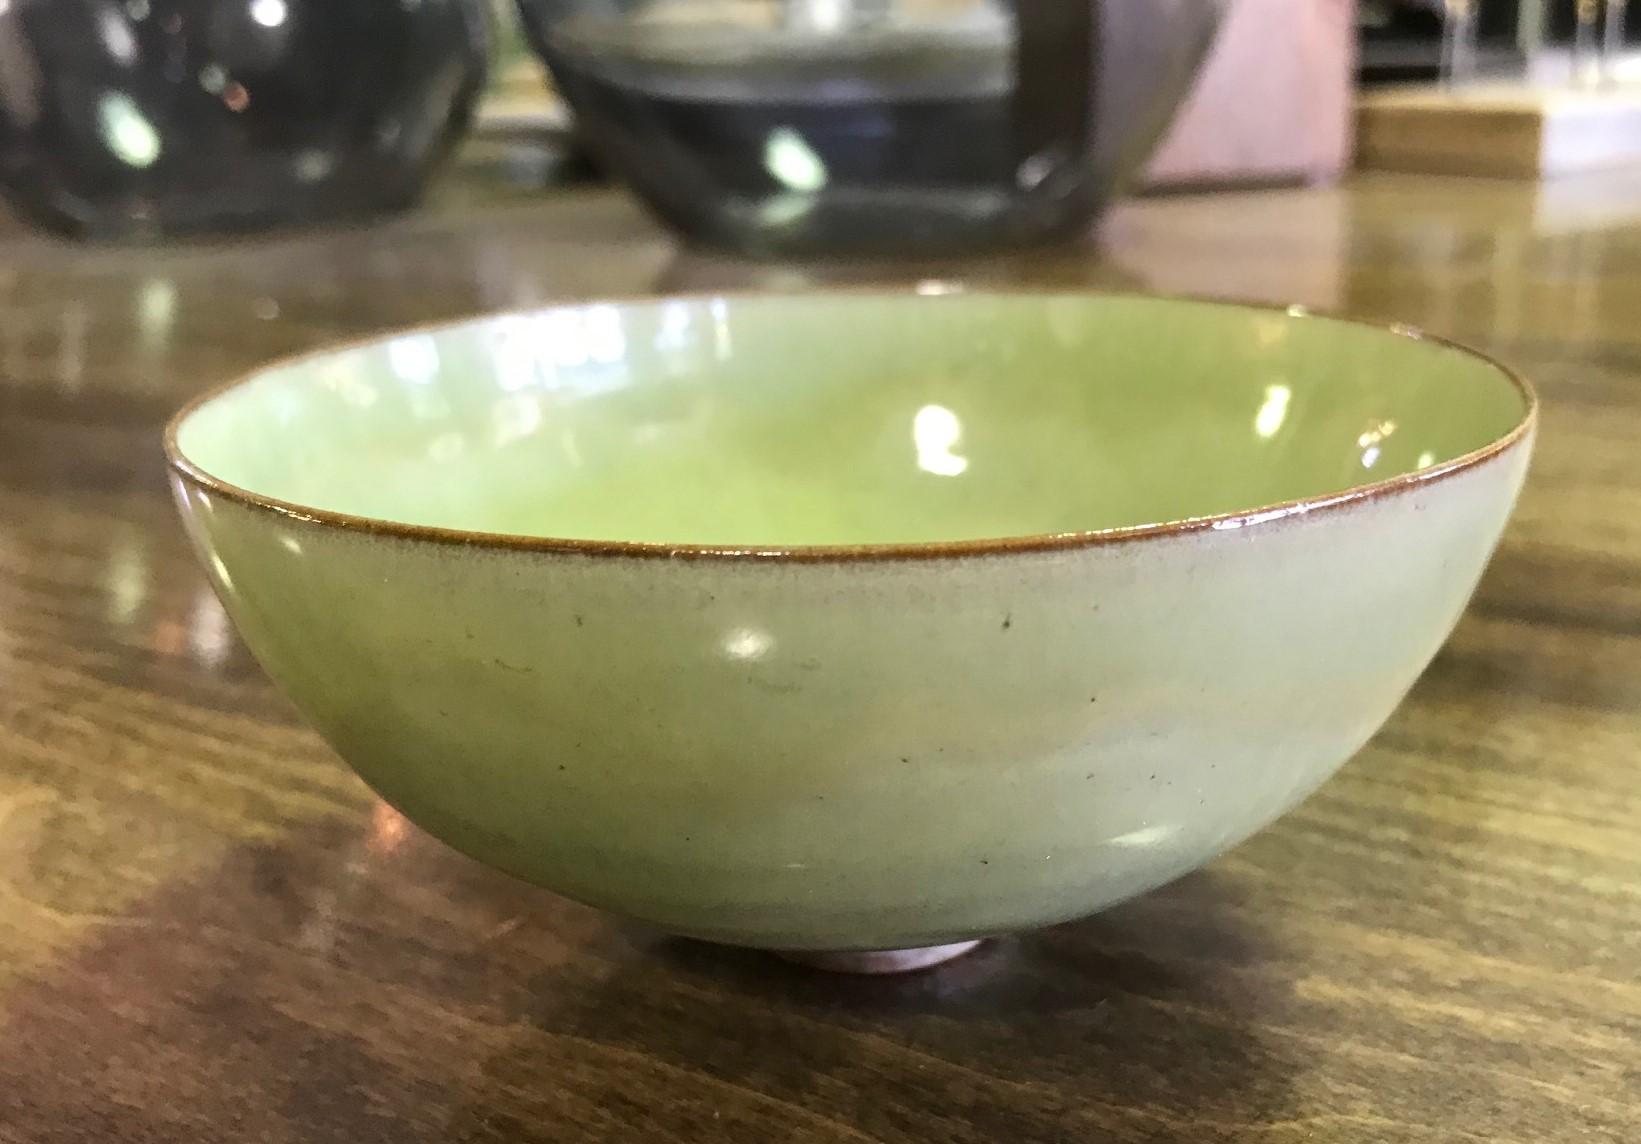 A wonderfully glazed and delicately designed work by famed pottery masters Otto and Gertrud Natzler. This round-shaped, eggshell thin-walled bowl was hand thrown and formed by Gertrud and glazed by Otto with a beautiful lime green glaze. The bowl